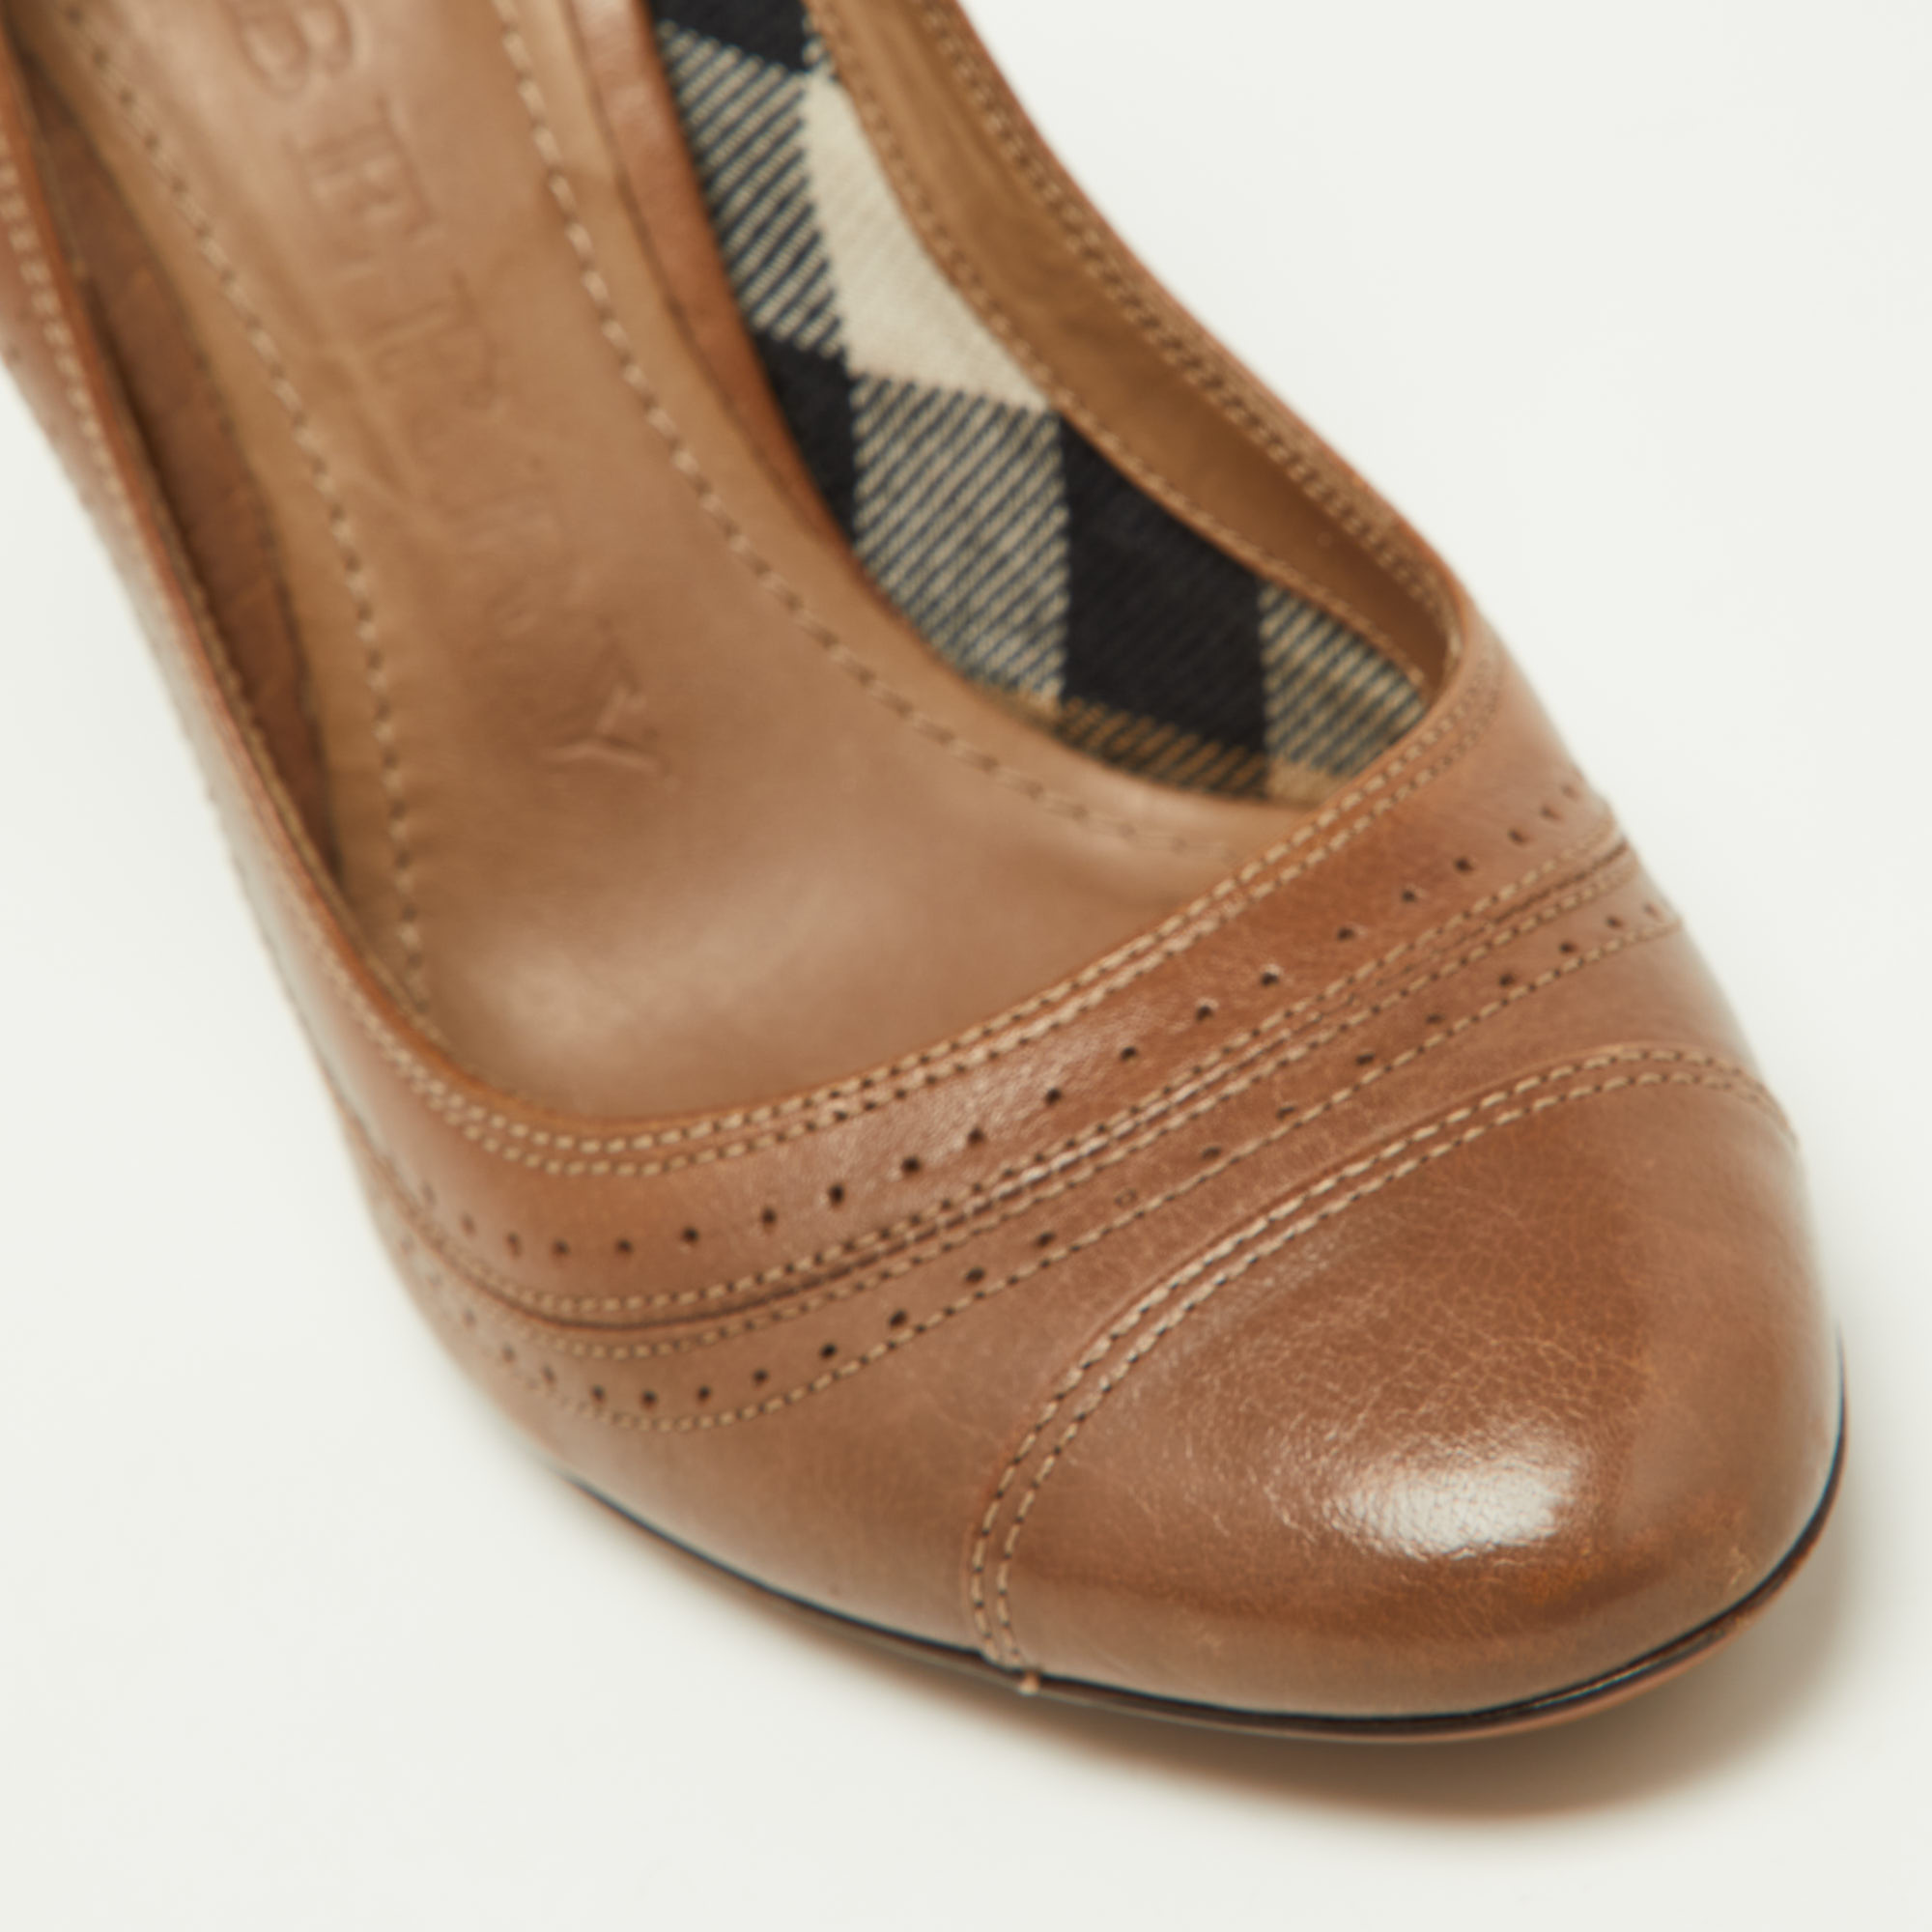 Burberry Brown Leather Round Toe Pumps Size 36